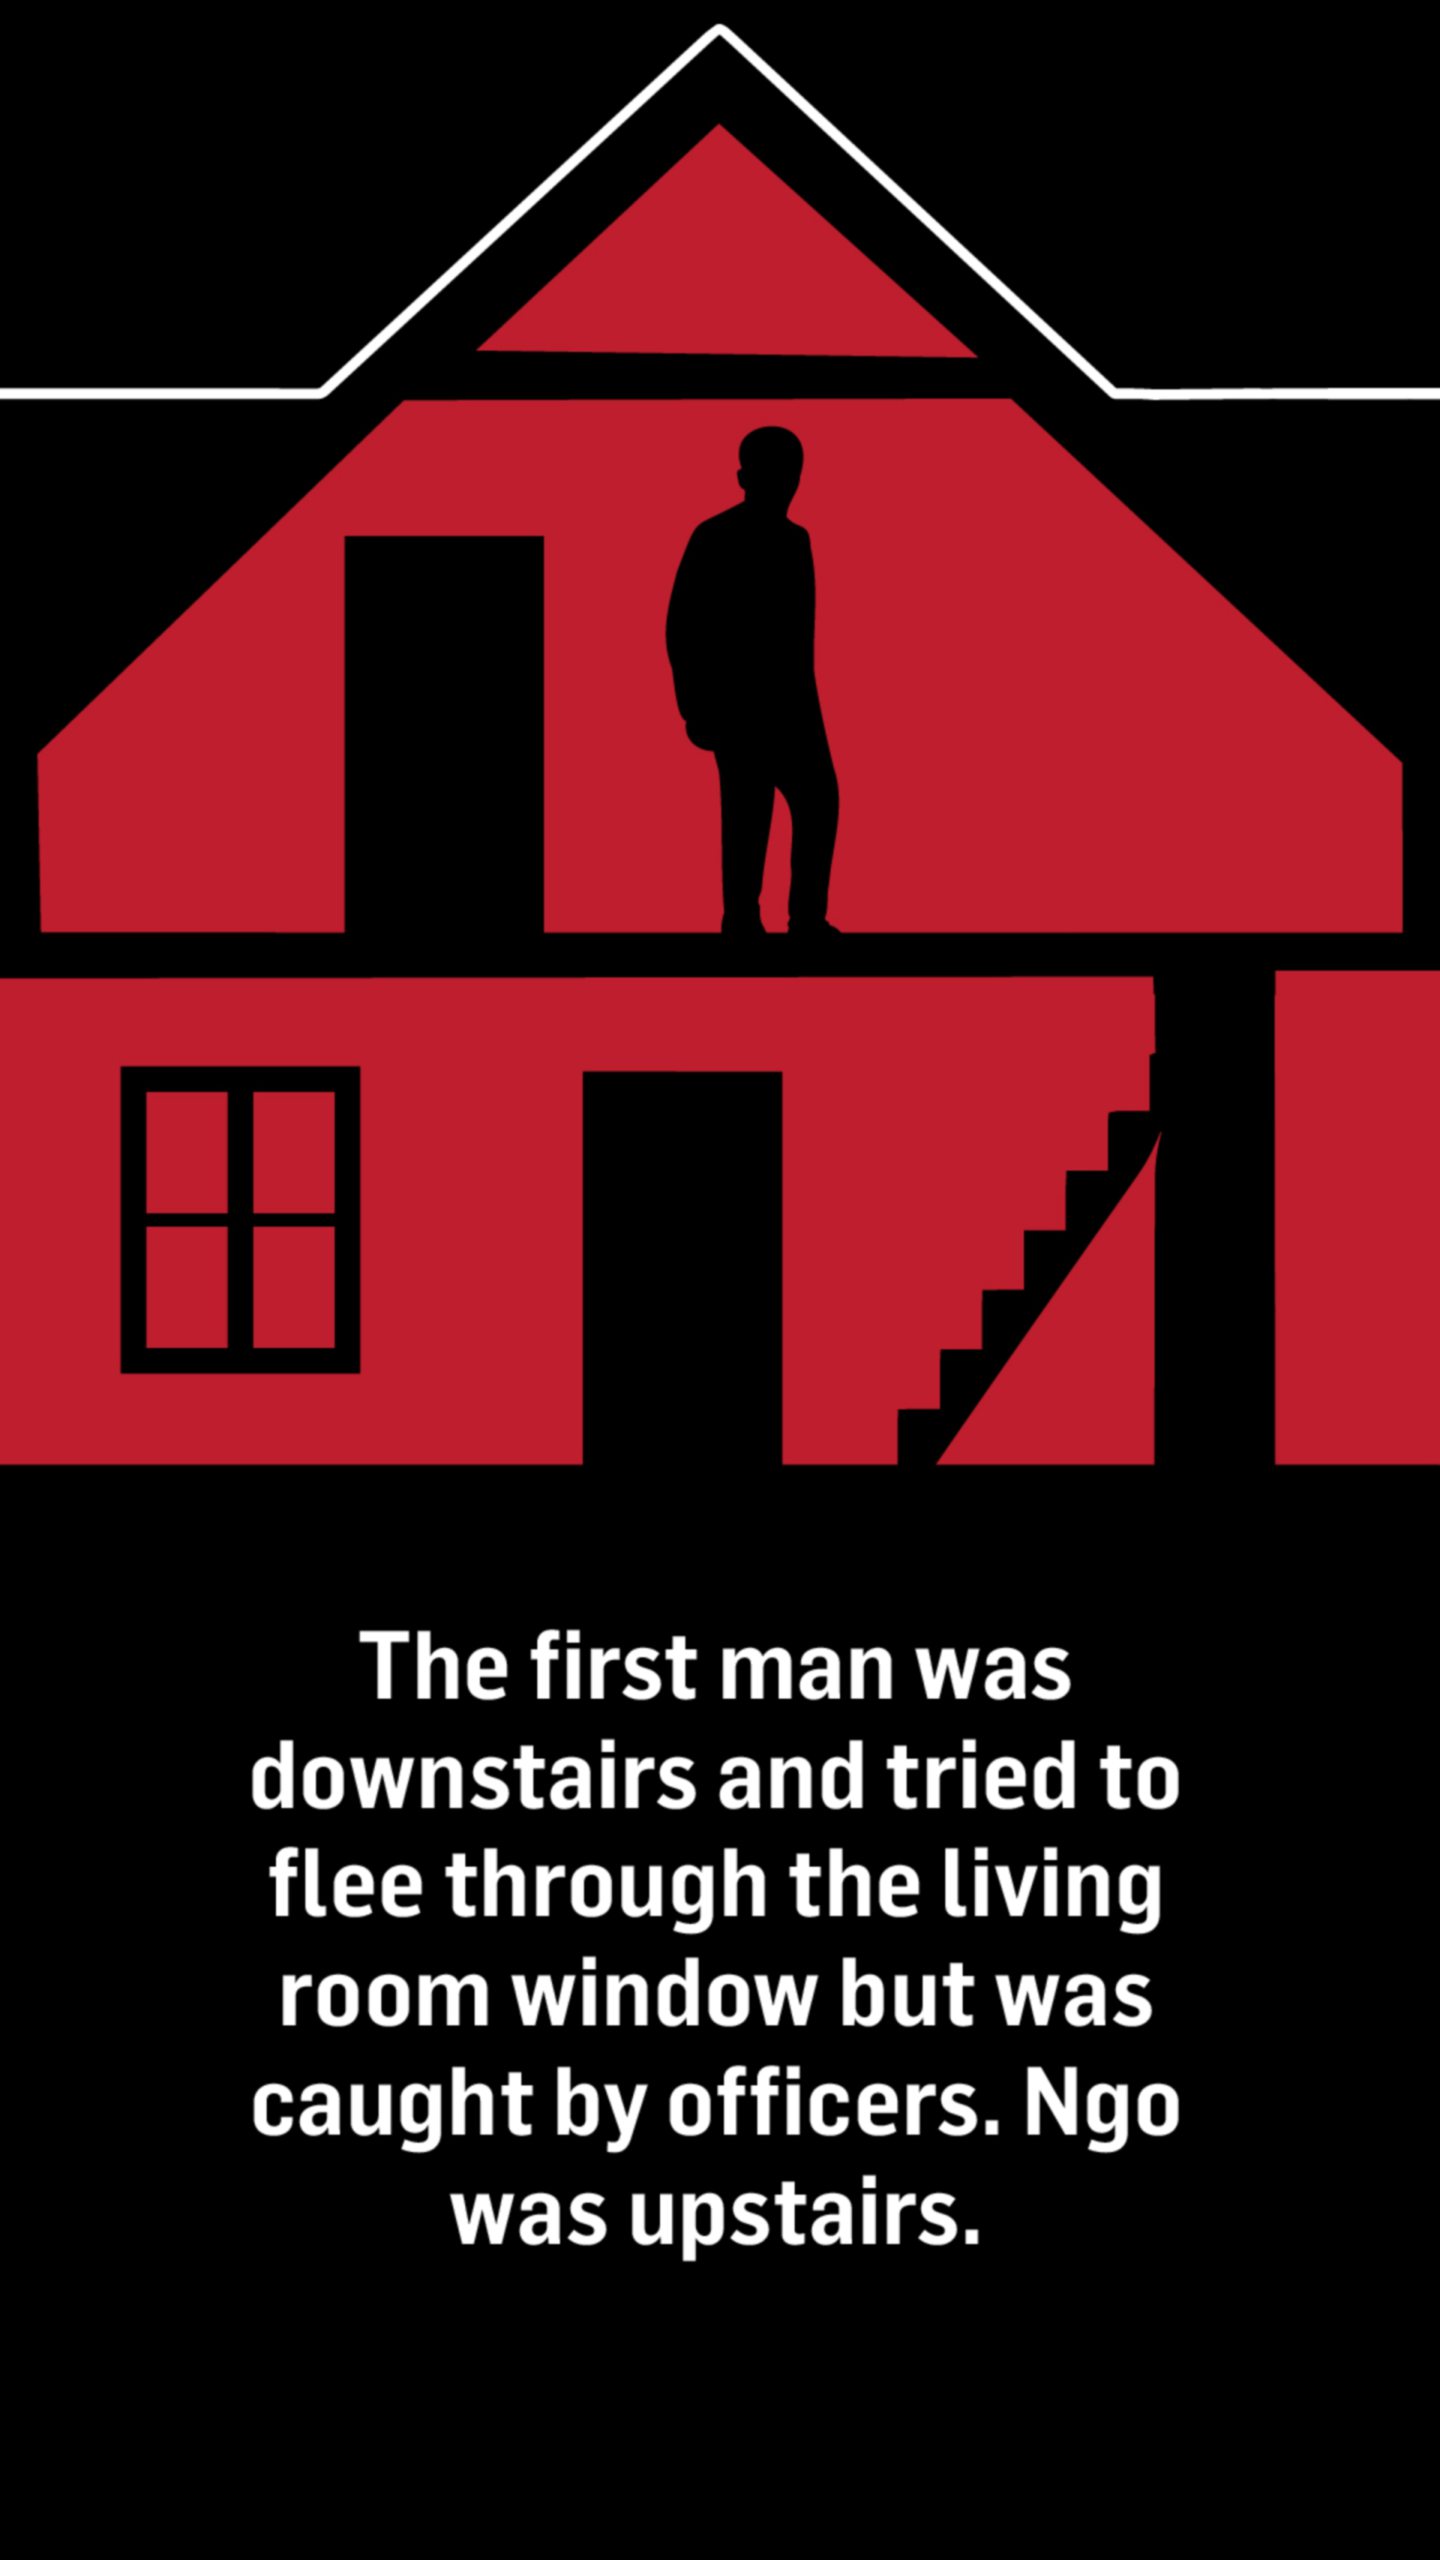 A silhouette of a two story house with a man standing on the second floor. Text below the house reads: The first man was downstairs and tried to flee through the living room window but was caught by officers. Ngo was upstairs.